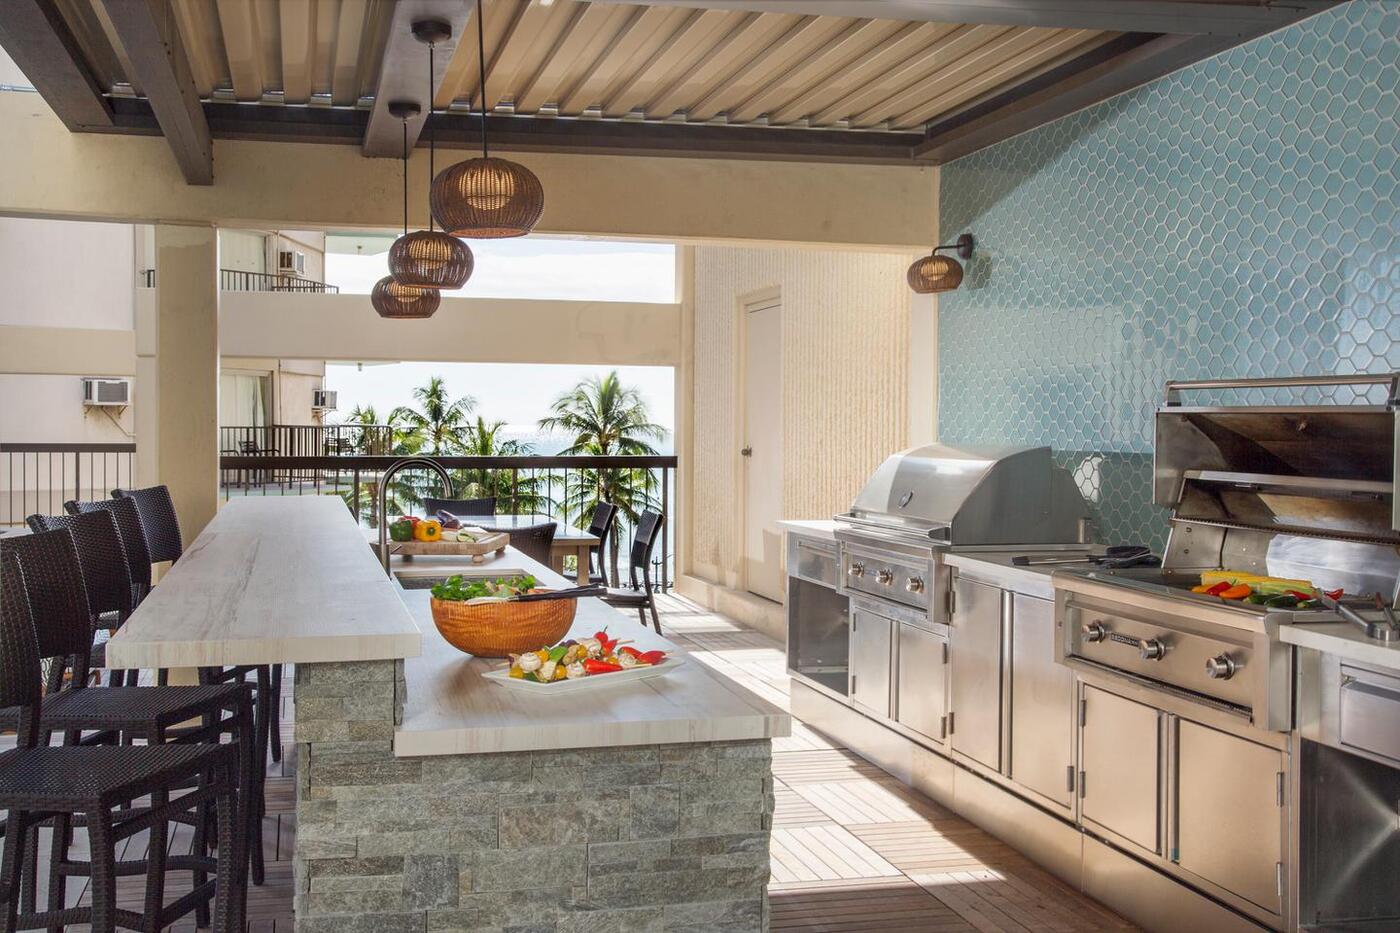 Outdoor barbecue grills, sink, and counter for dining